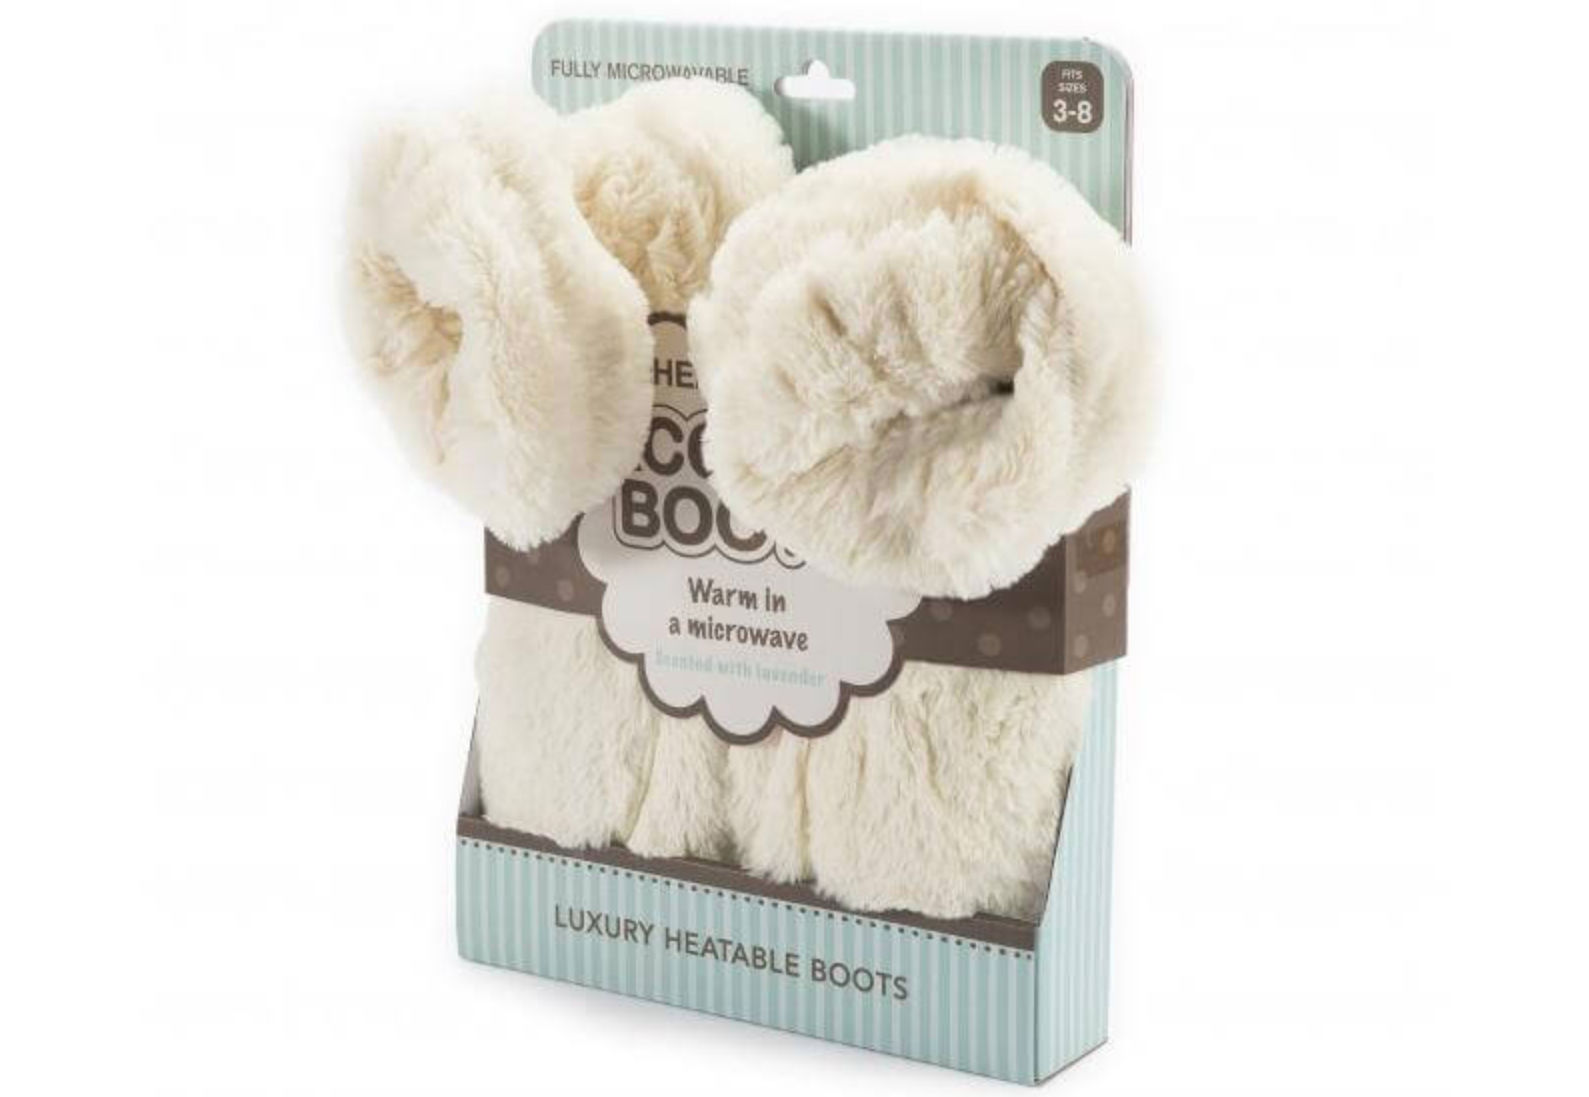 These fluffy slipper boots can be popped in the microwave to keep feet toasty warm, The Manc